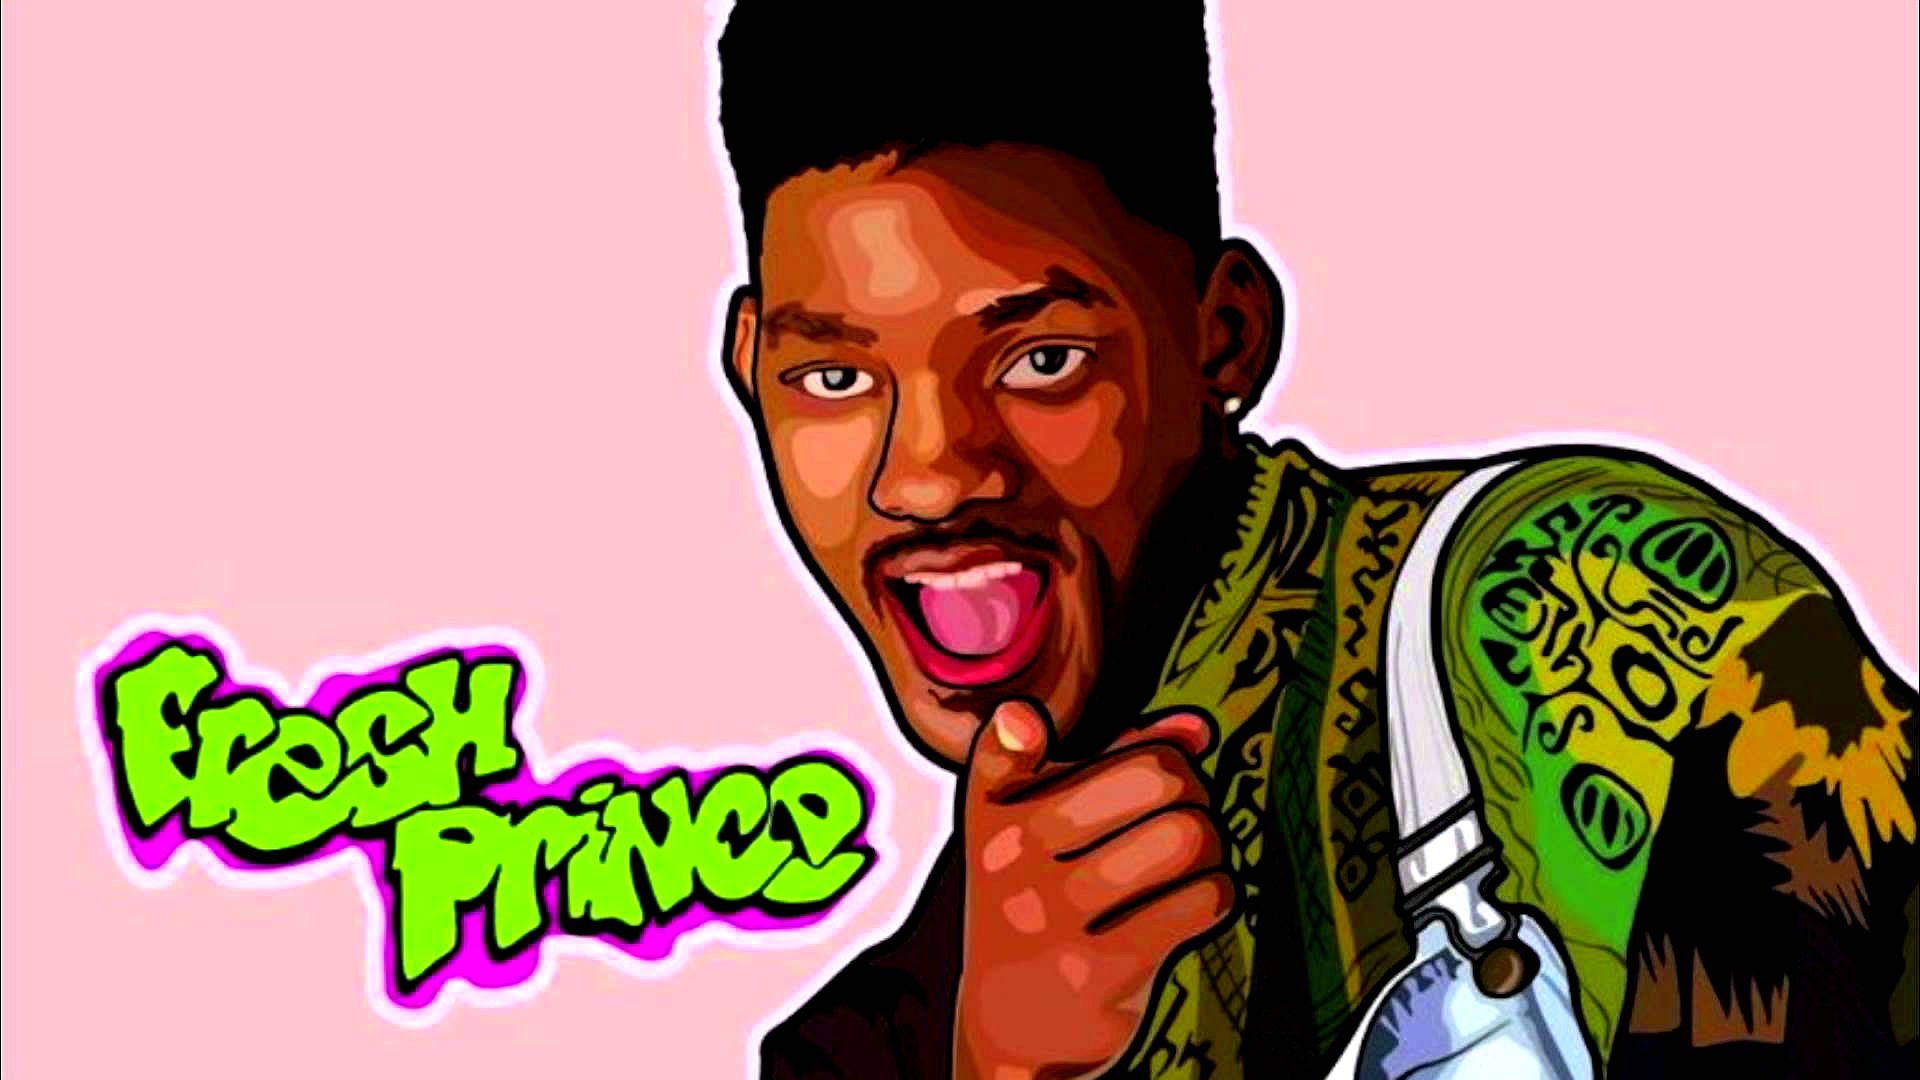 fresh prince of bel air, Comedy, Sitcom, Series, Television, Will